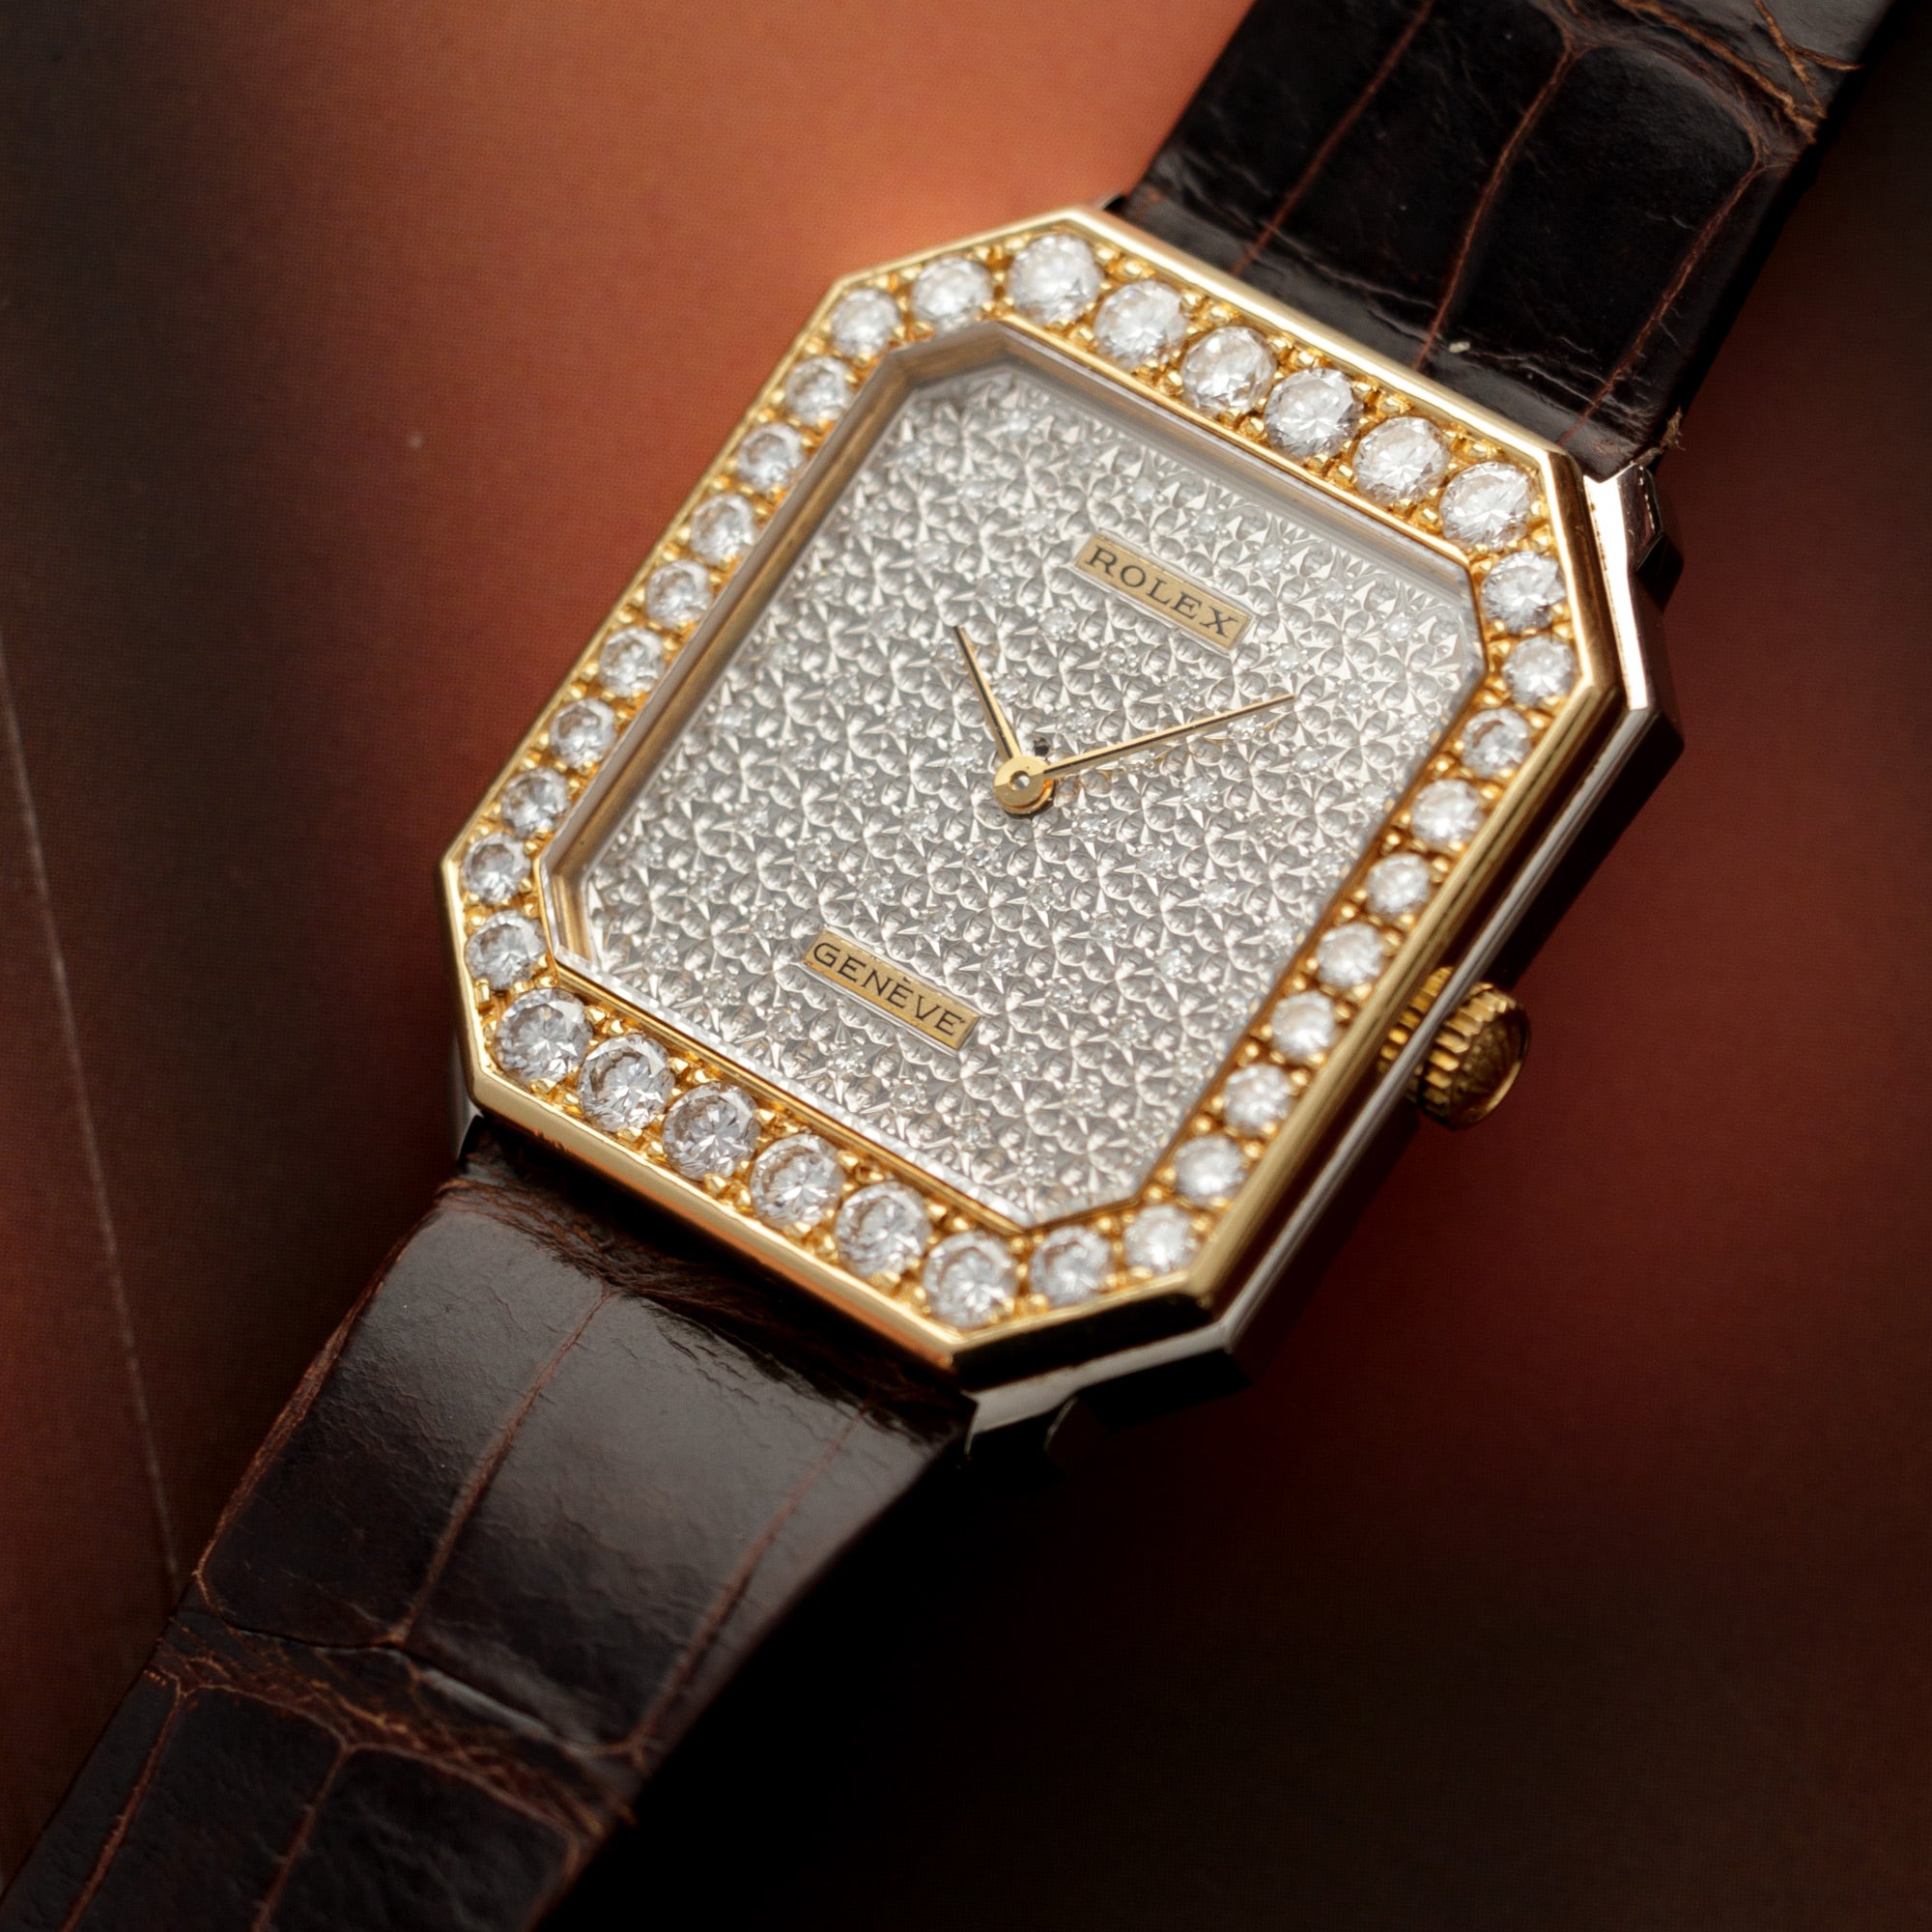 Rolex - Rolex Yellow Gold Diamond Watch Ref. 5032, Made for the Sultan of Oman - The Keystone Watches